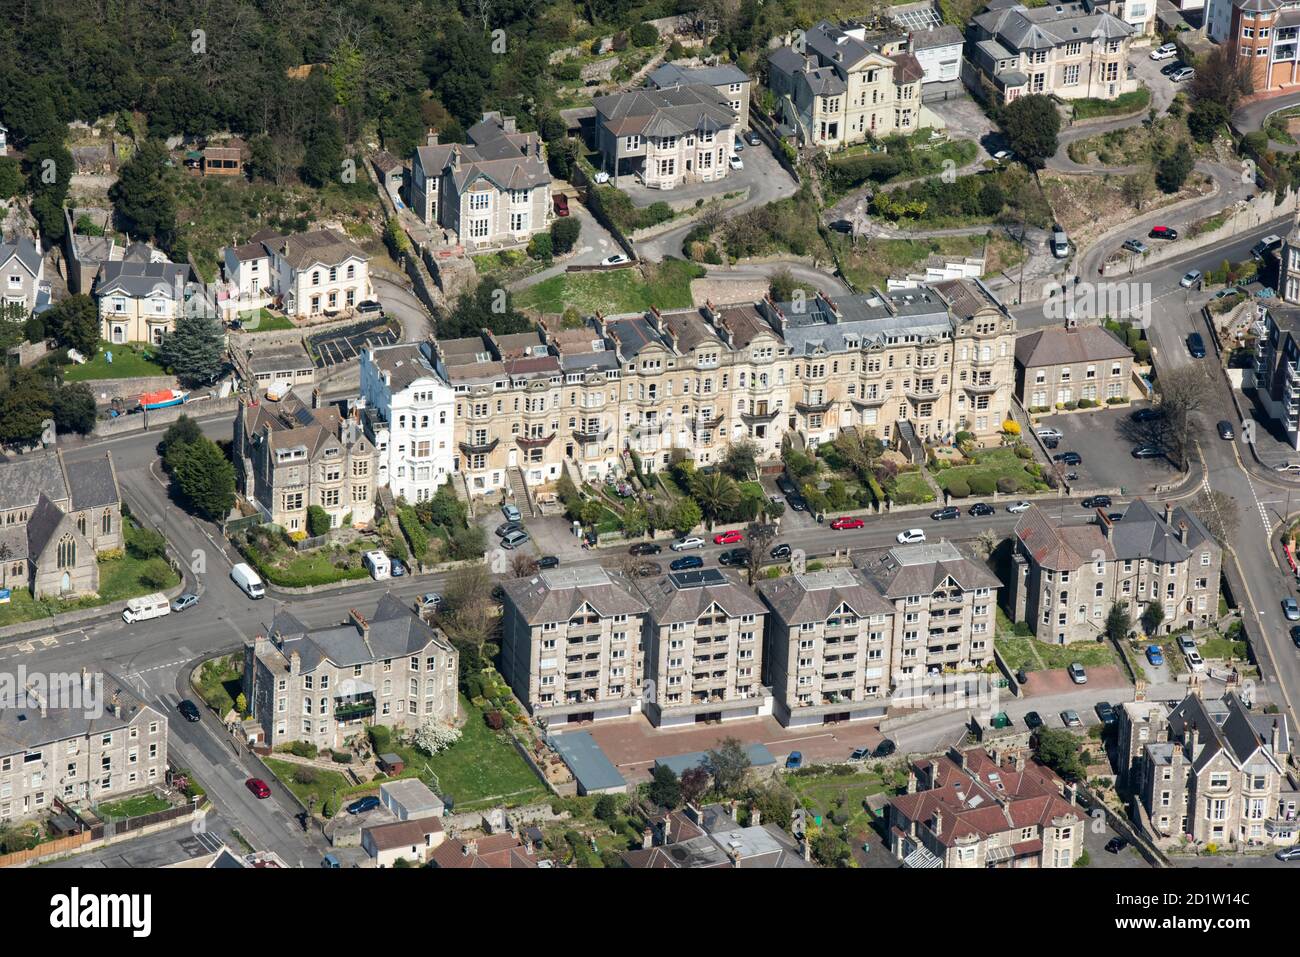 Victorian Terrace on Atlantic Road, Weston-Super-Mare, North Somerset, 2018, UK. Aerial view. Stock Photo